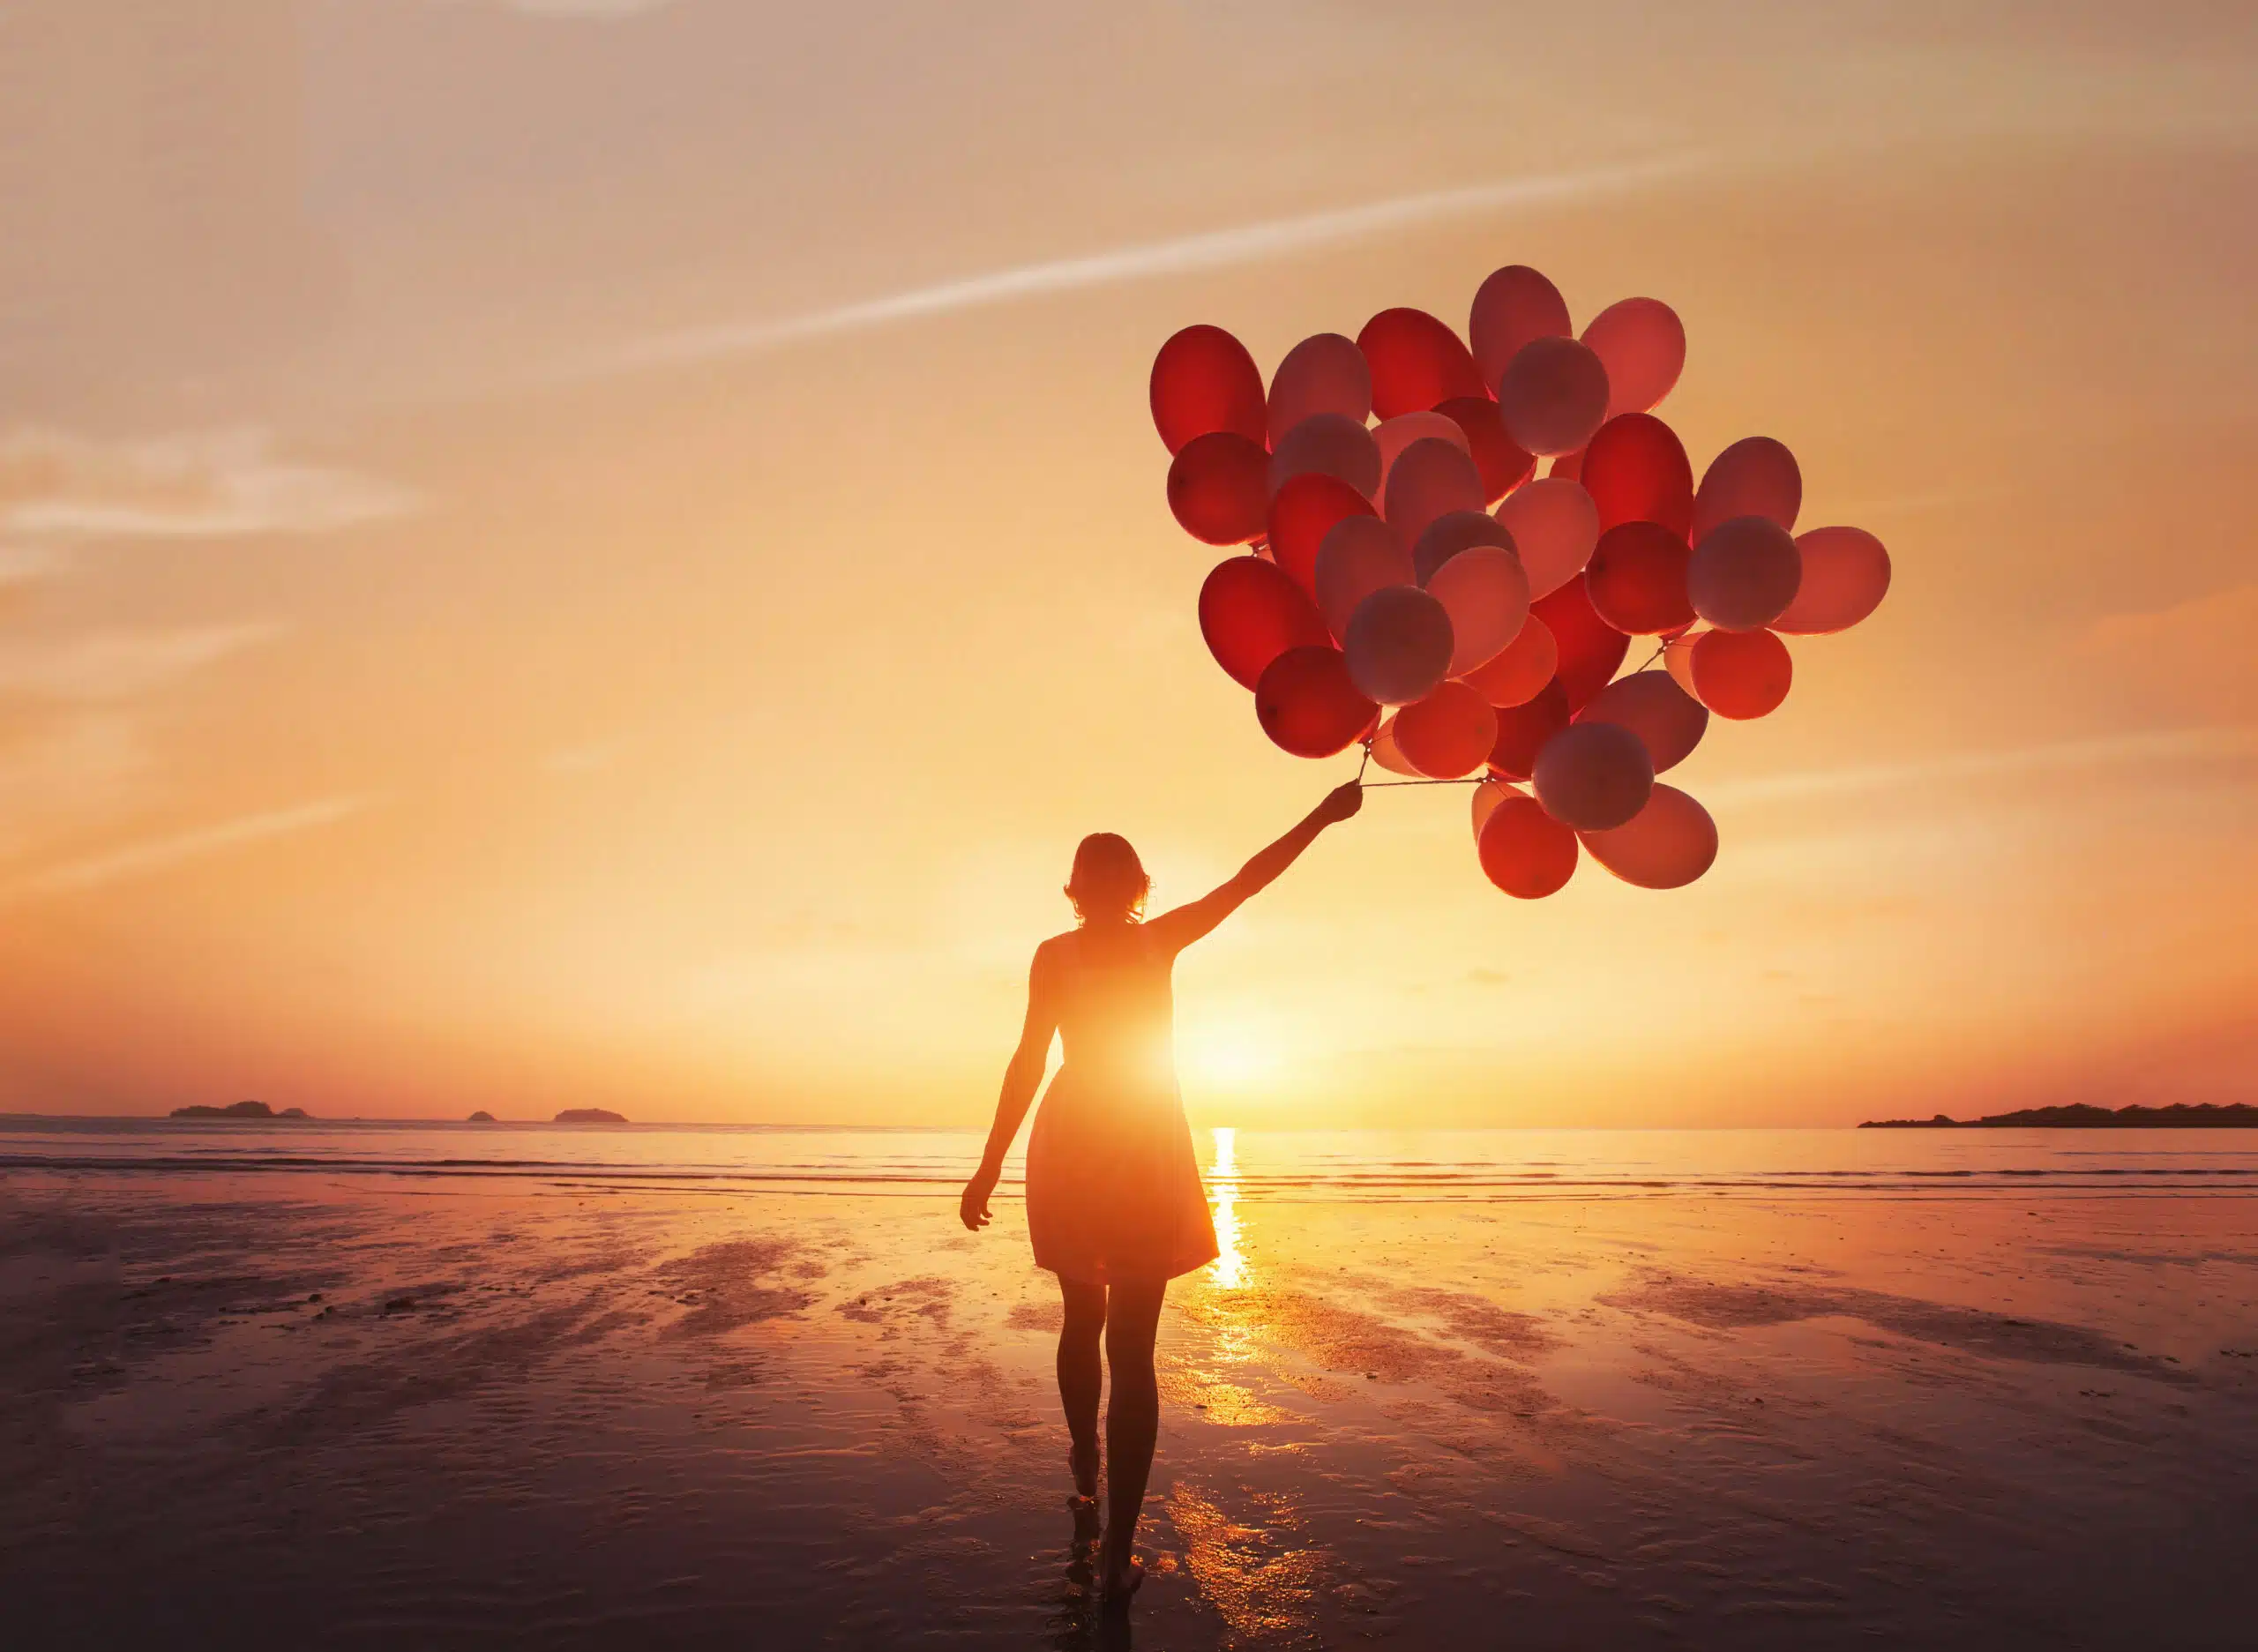 Silhouette of a free and hopeful woman with balloons in the sunrise.